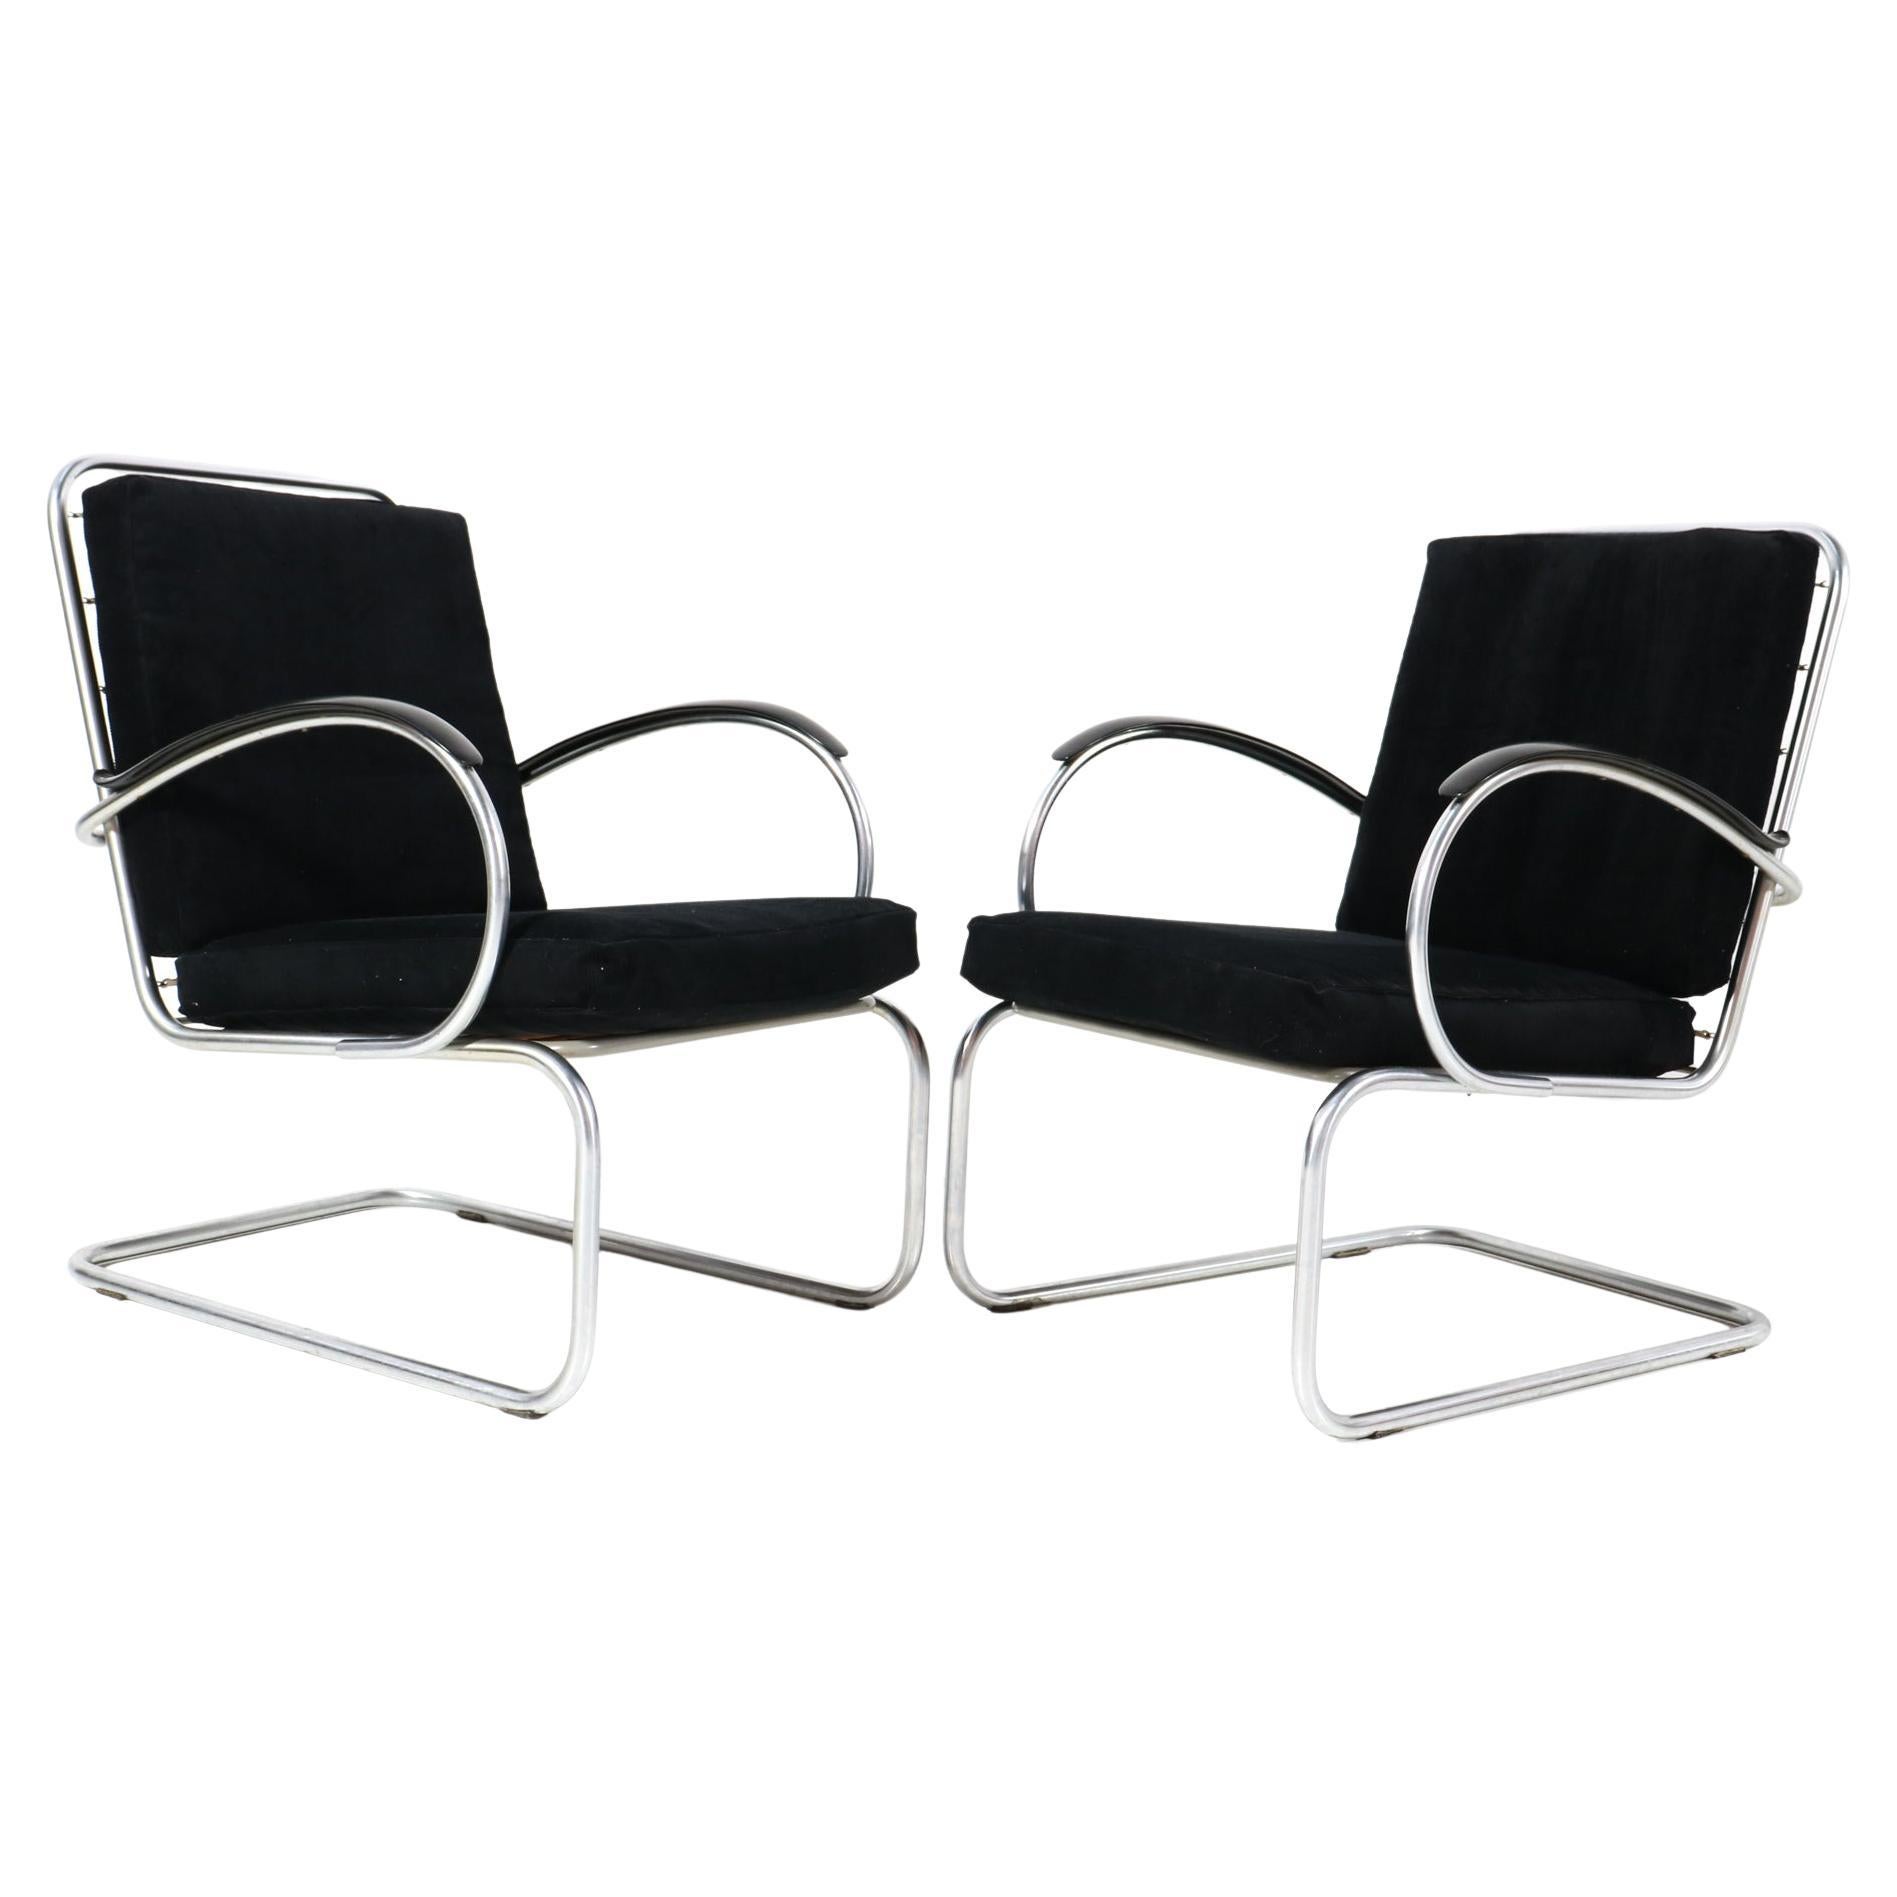 Two Art Deco Bauhaus Model 409 Lounge Chairs by W.H. Gispen for Gispen, 1930s